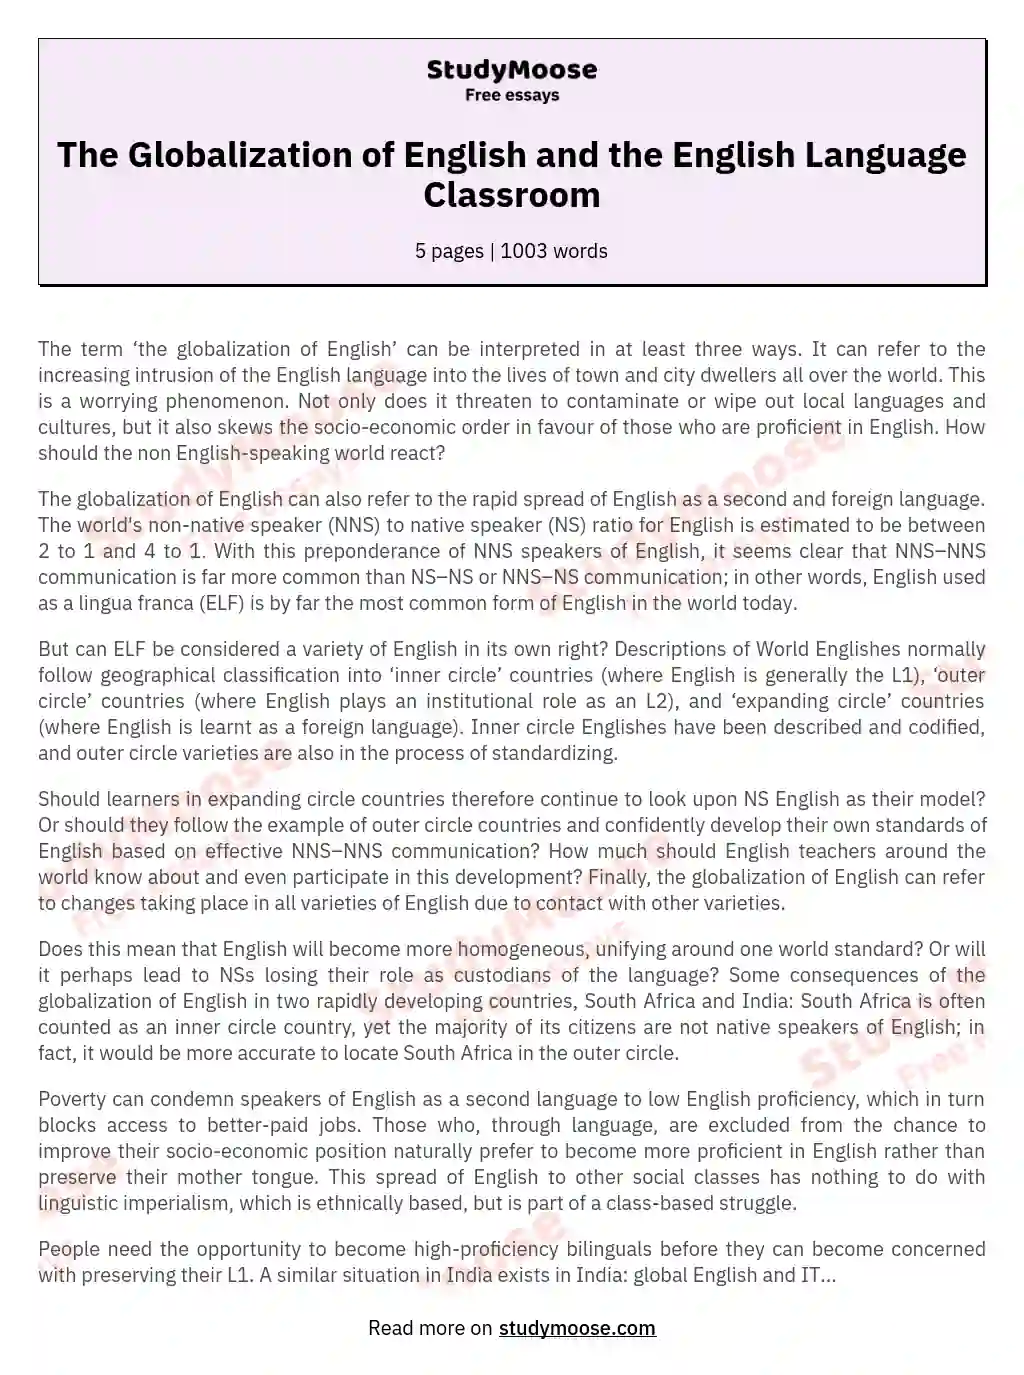 The Globalization of English and the English Language Classroom